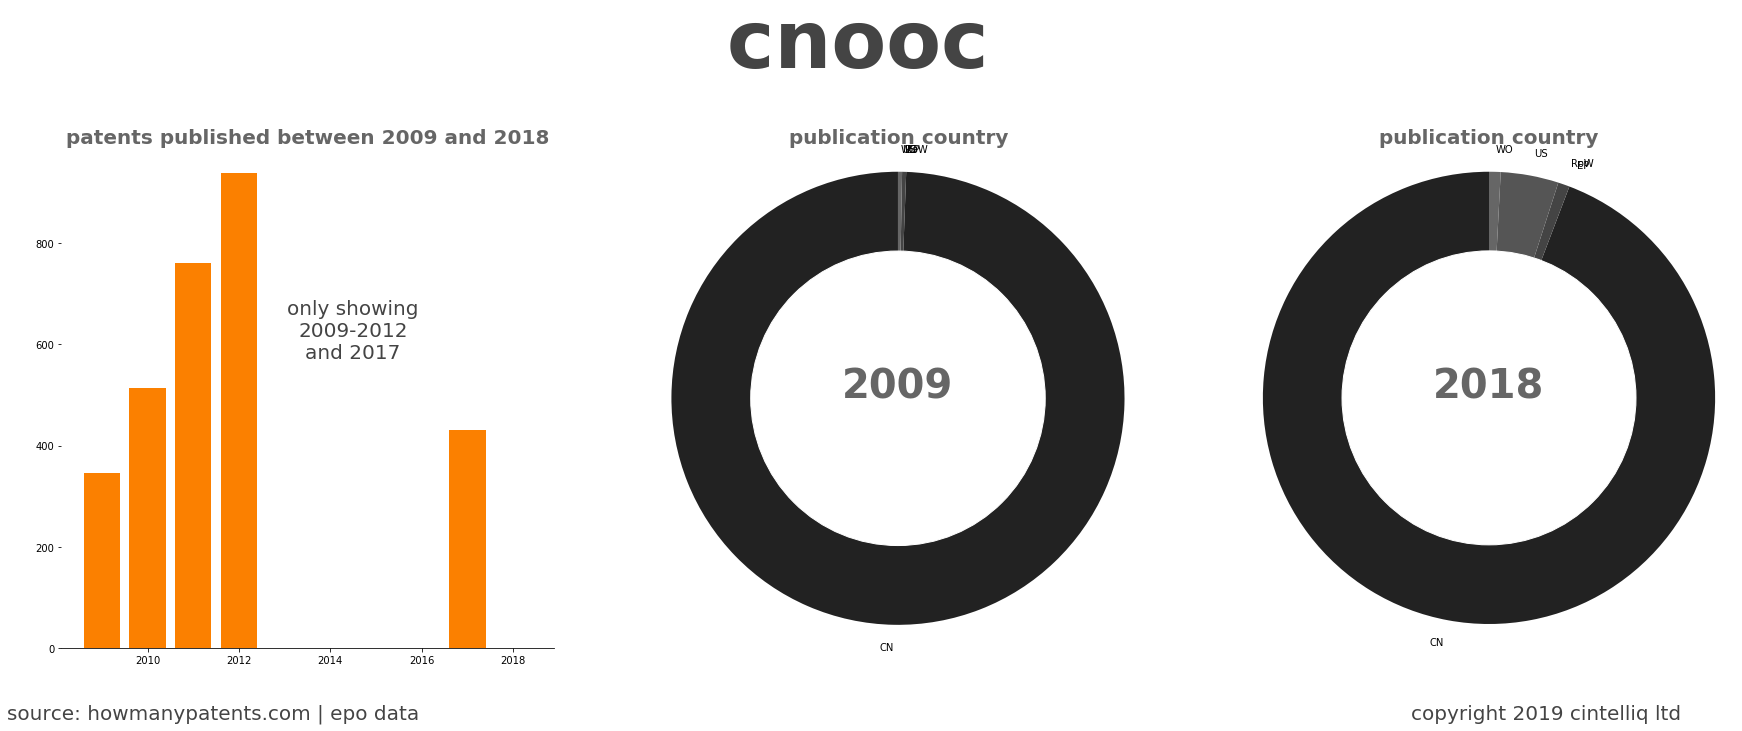 summary of patents for Cnooc 